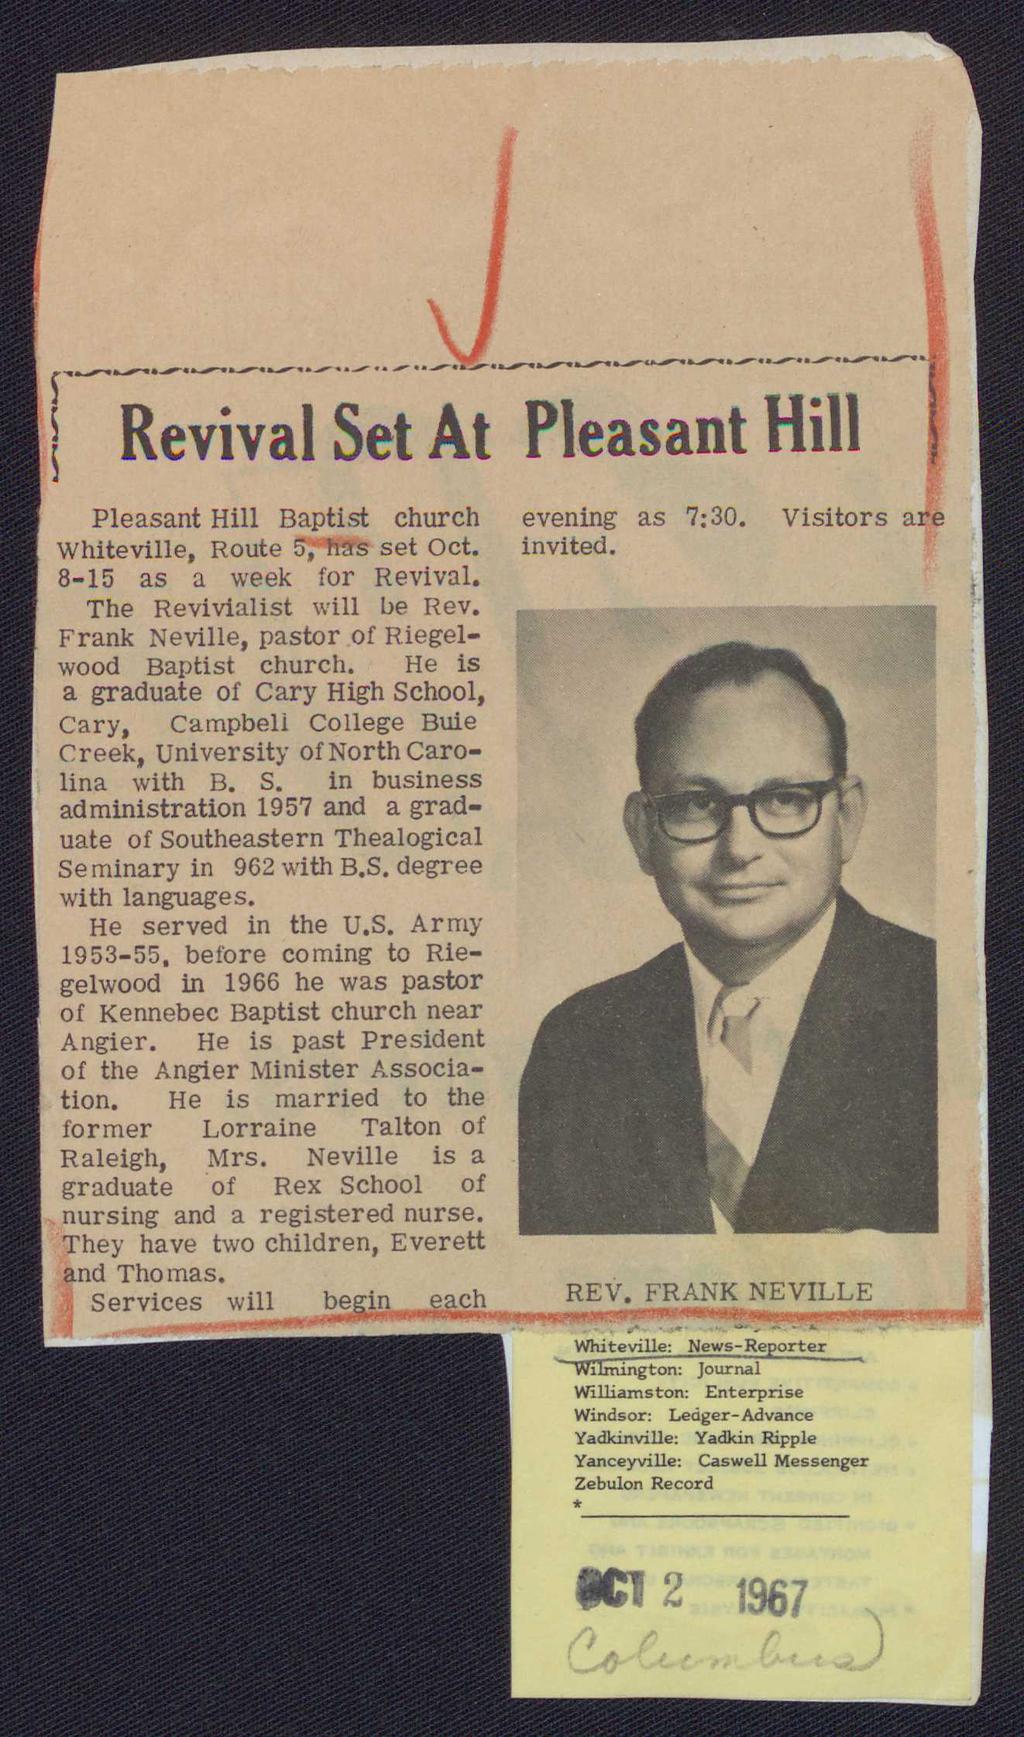 5.,...,,..._..._.............-..--...-...-........._..._.._,...-..._.~ --. _...... i Revival Set At Pleasant Hill Pleasant Hill Baptist church Whiteville, Route o, has set Oct.